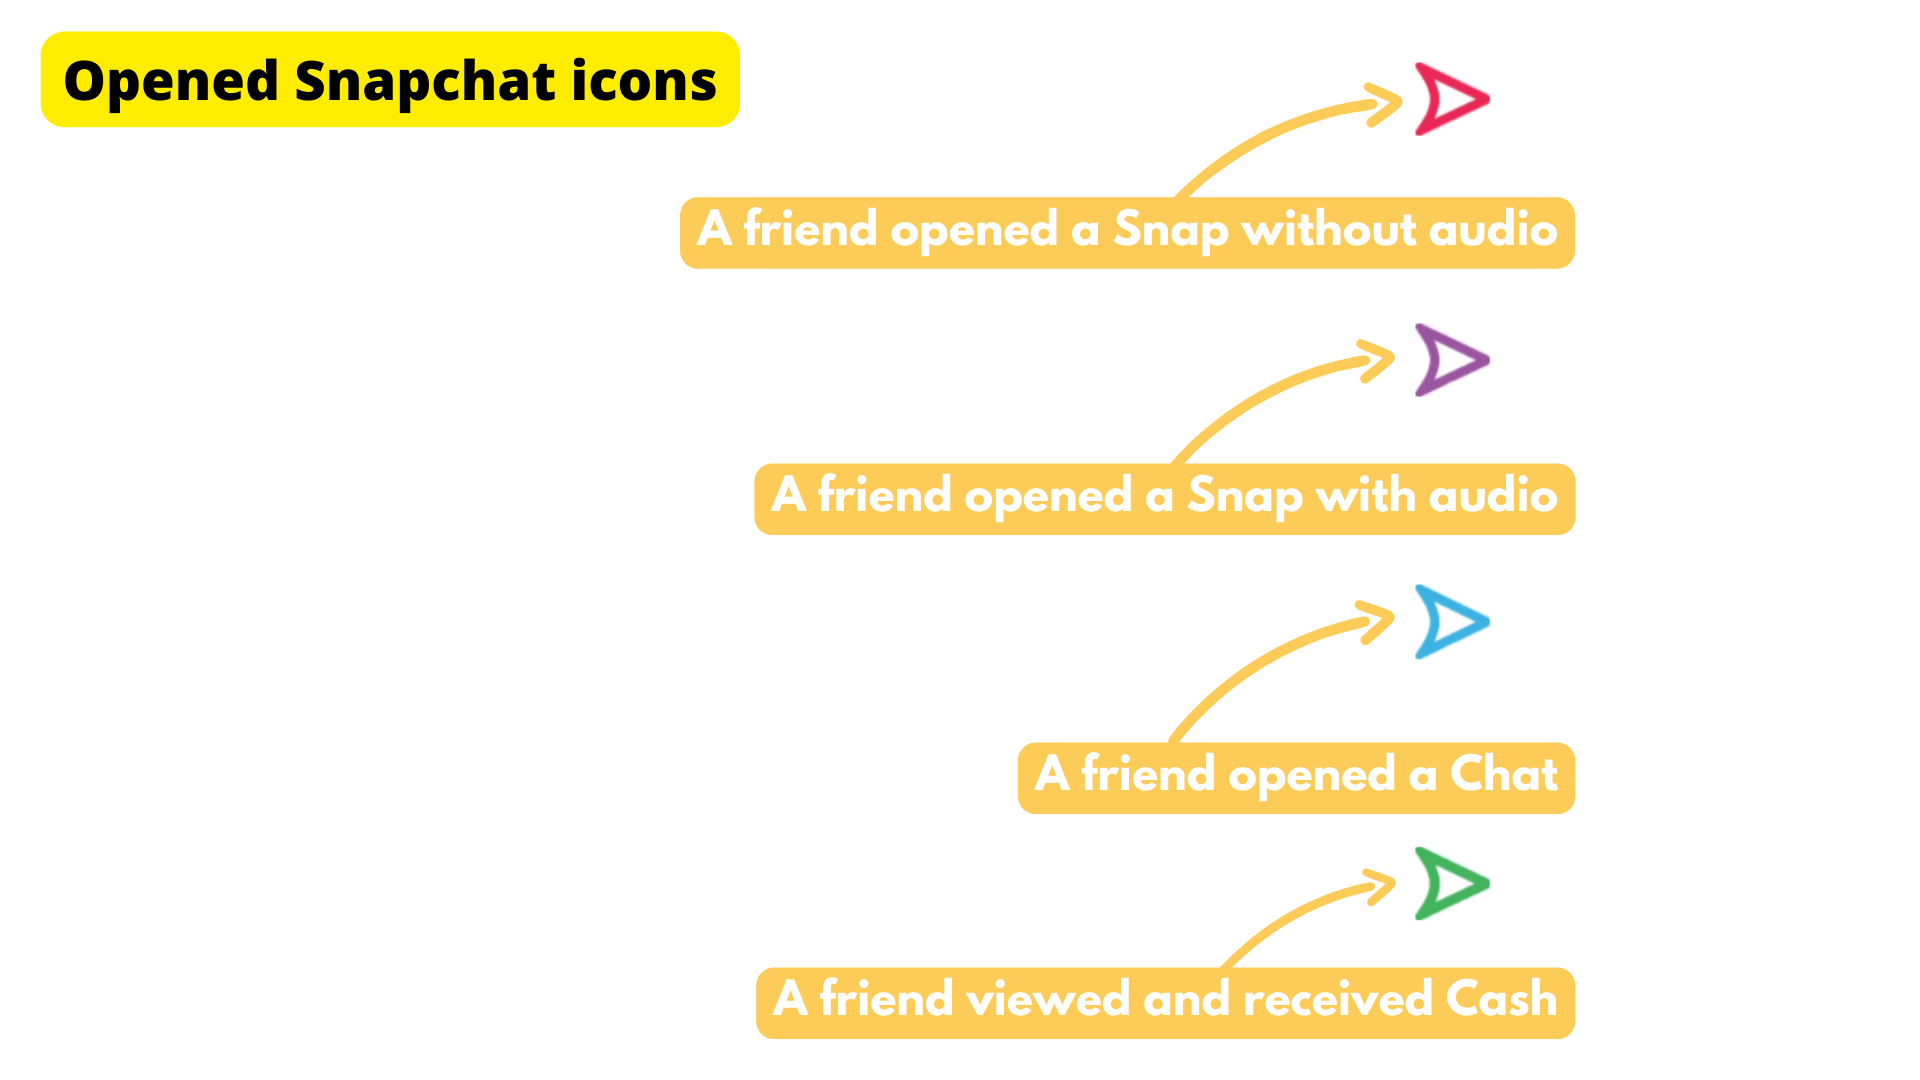 opened snapchat icons meaning